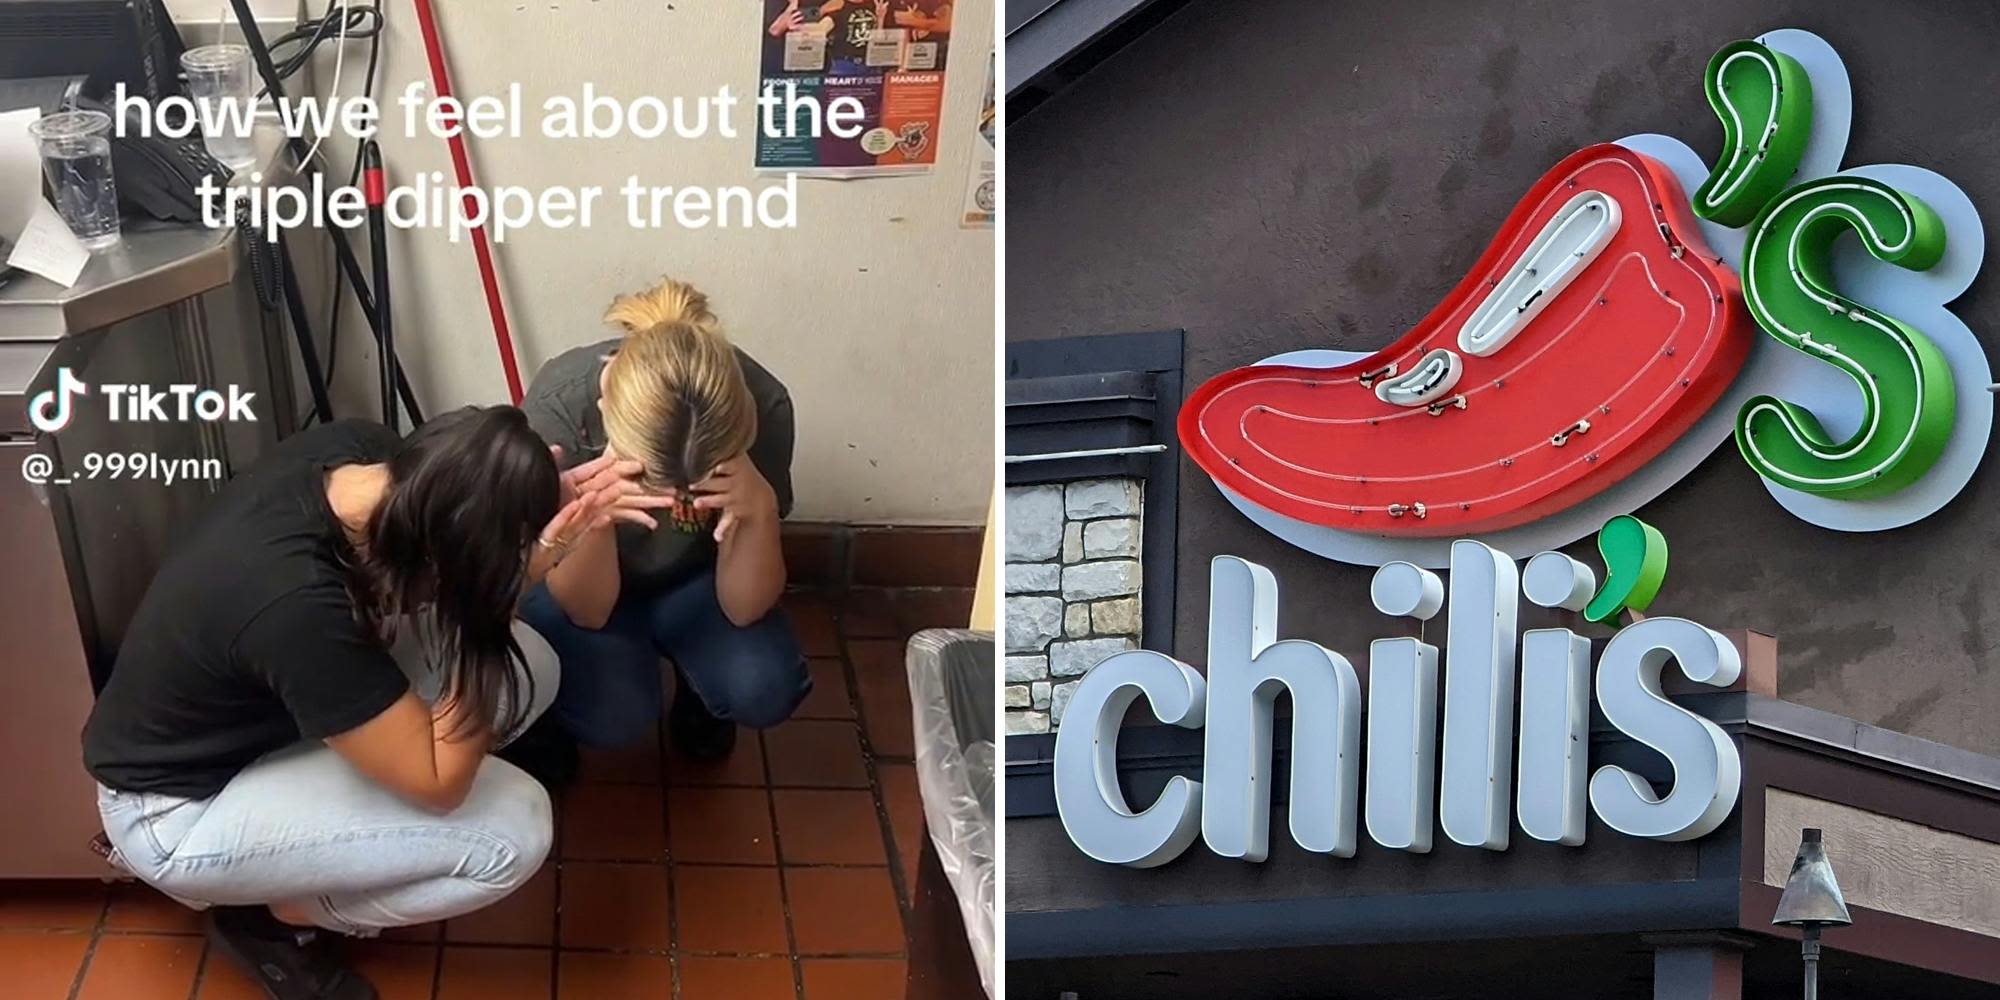 'There should not be a line out the door at Chili's': Chili's workers speak out about the 'triple dipper' trend